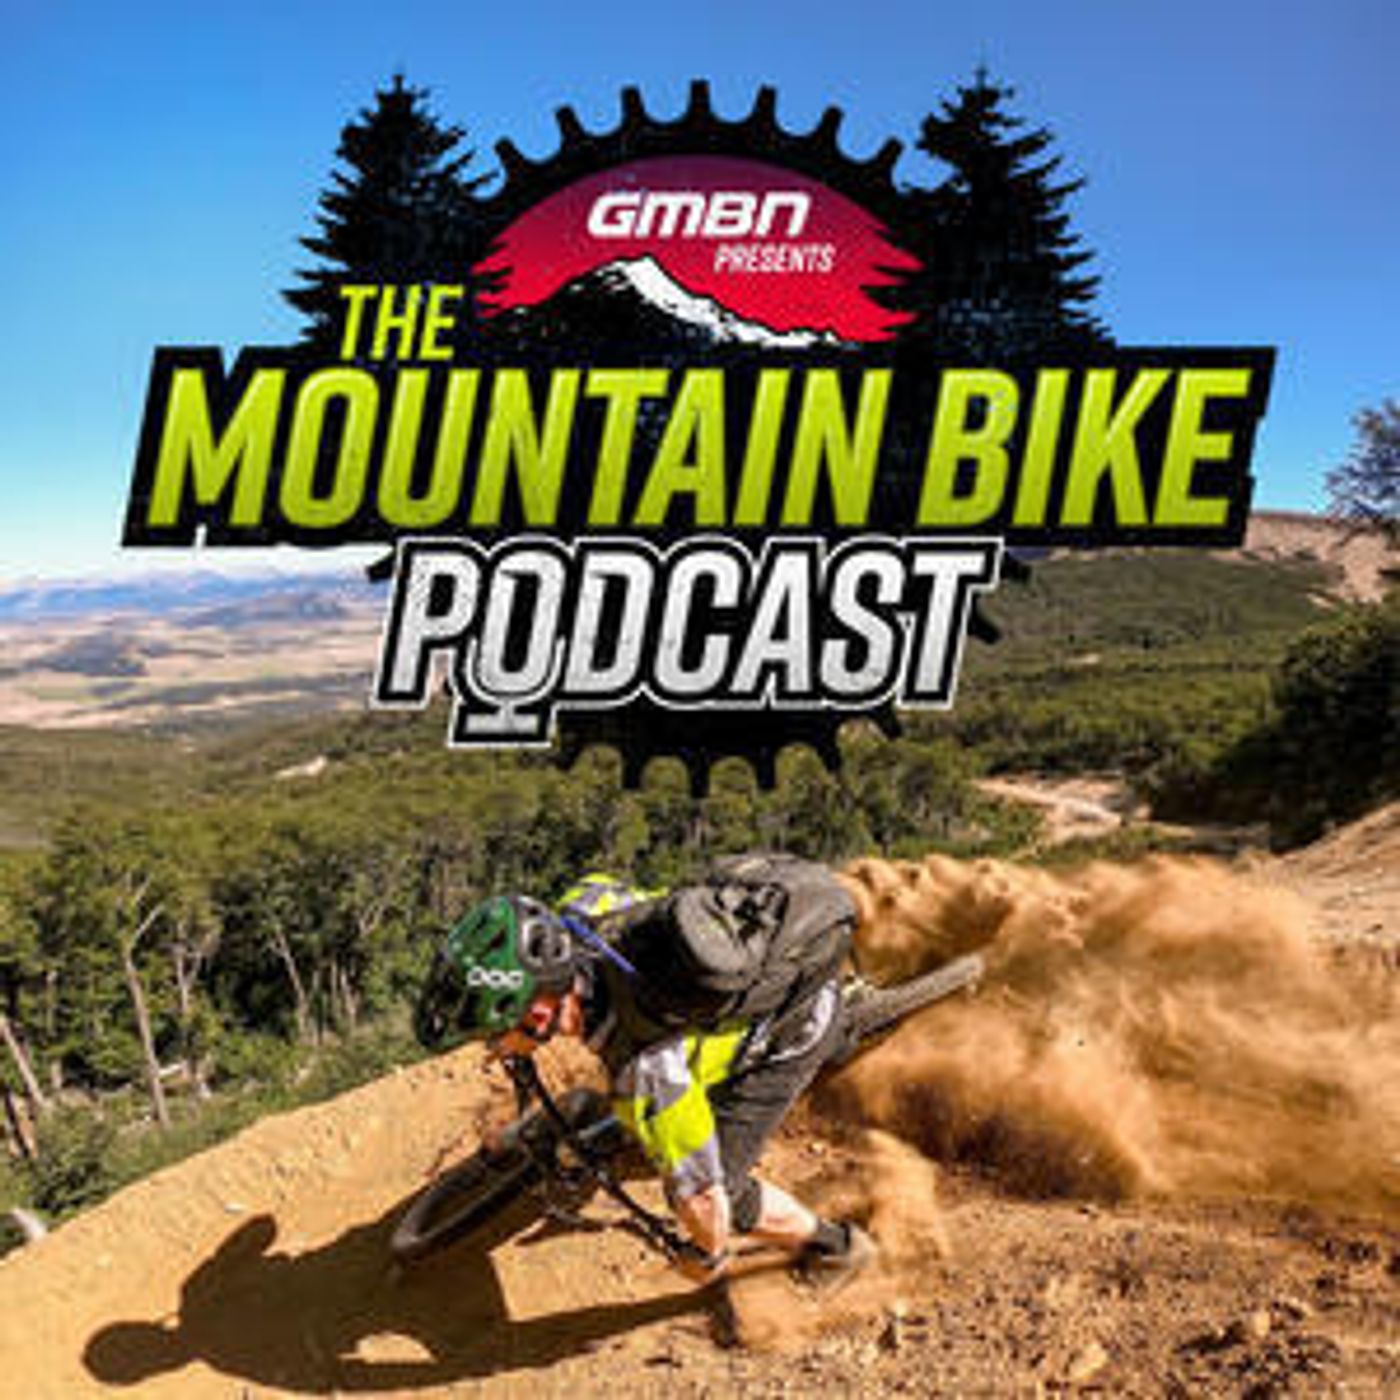 28: The Mountain Bike Podcast Presented By GMBN #28 | The Importance Of Dirt Jumping With Steve Geall